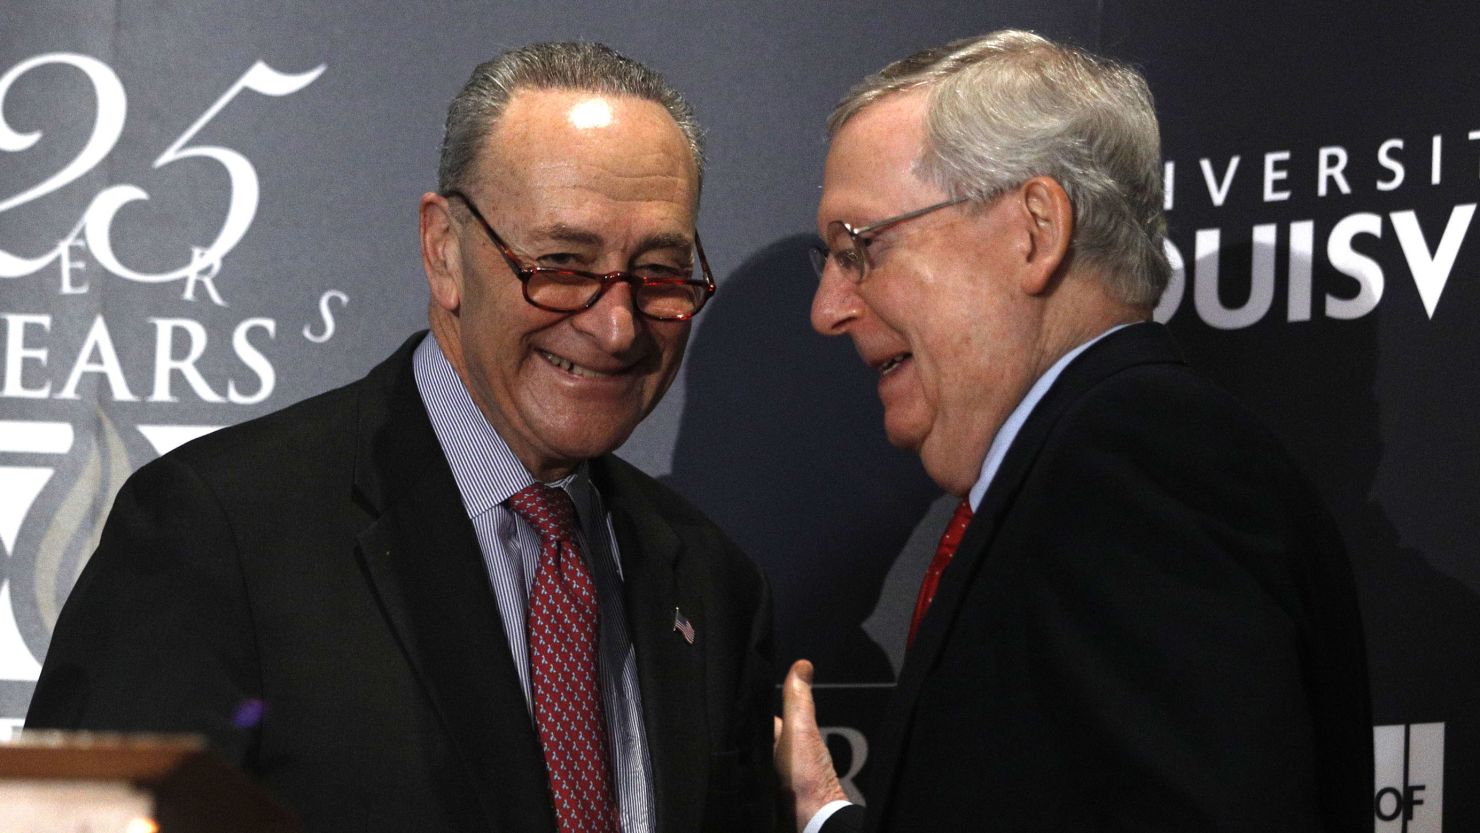 Senate Majority Leader Mitch McConnell (right) and Senate Minority Leader Chuck Schumer (left) shake hands after Shumer delivered a speech in Louisville in February. (Bill Pugliano/Getty Images)